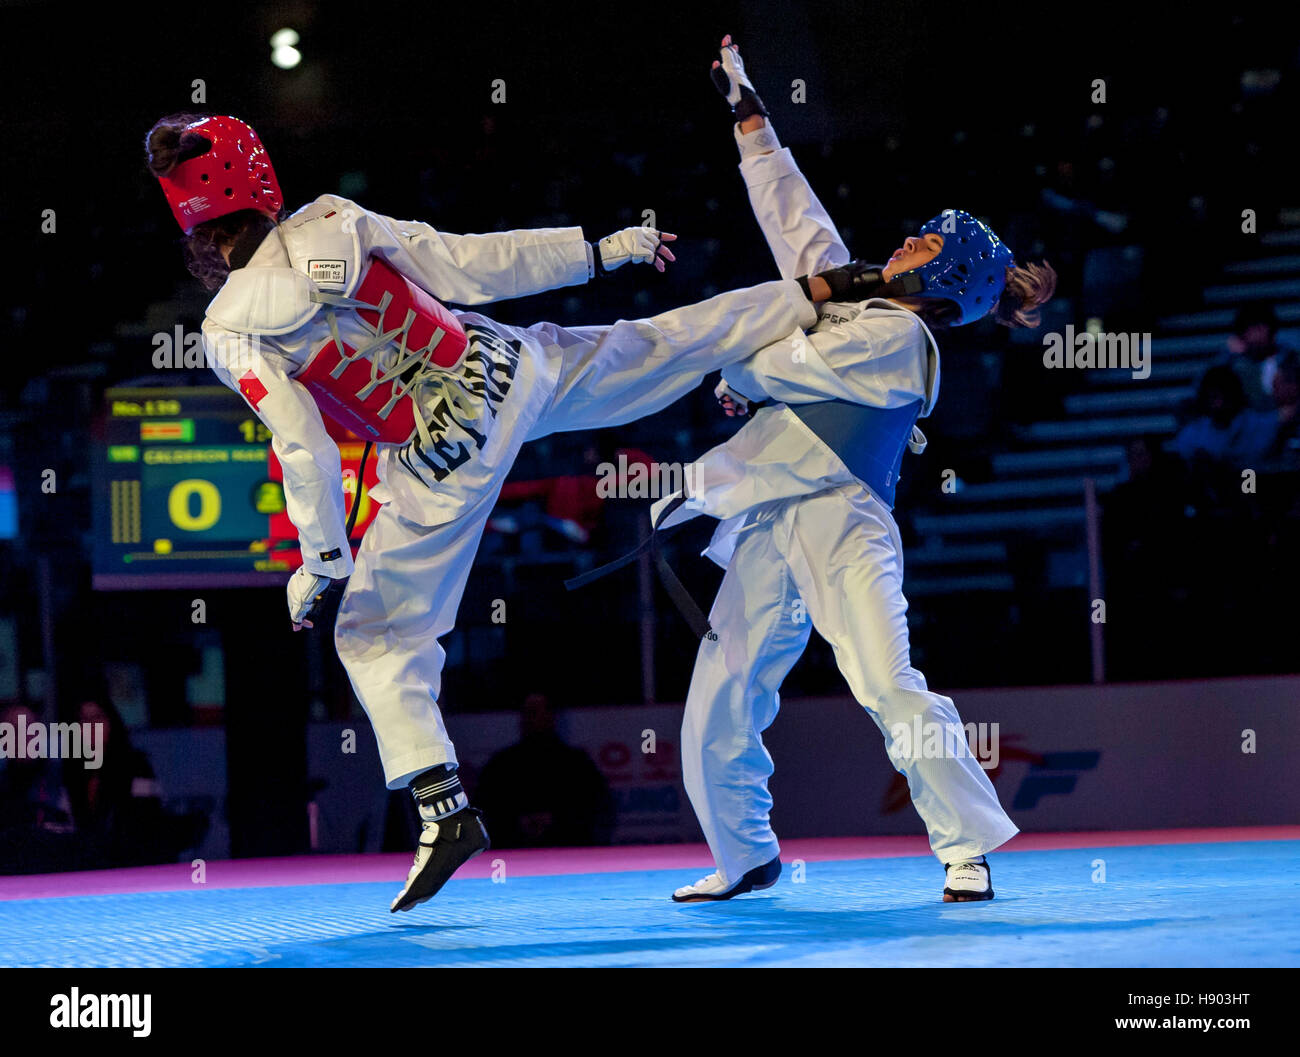 Burnaby, Canada. 16th Nov, 2016. WTF World Taekwondo Junior Championships, Maria Calderon (CRC) blue and Thi Kim Ngan Ho (VIE) red, compete in female 44kg class gold medal match. Ho took the gold medal Credit:  Peter Llewellyn/Alamy Live News Stock Photo